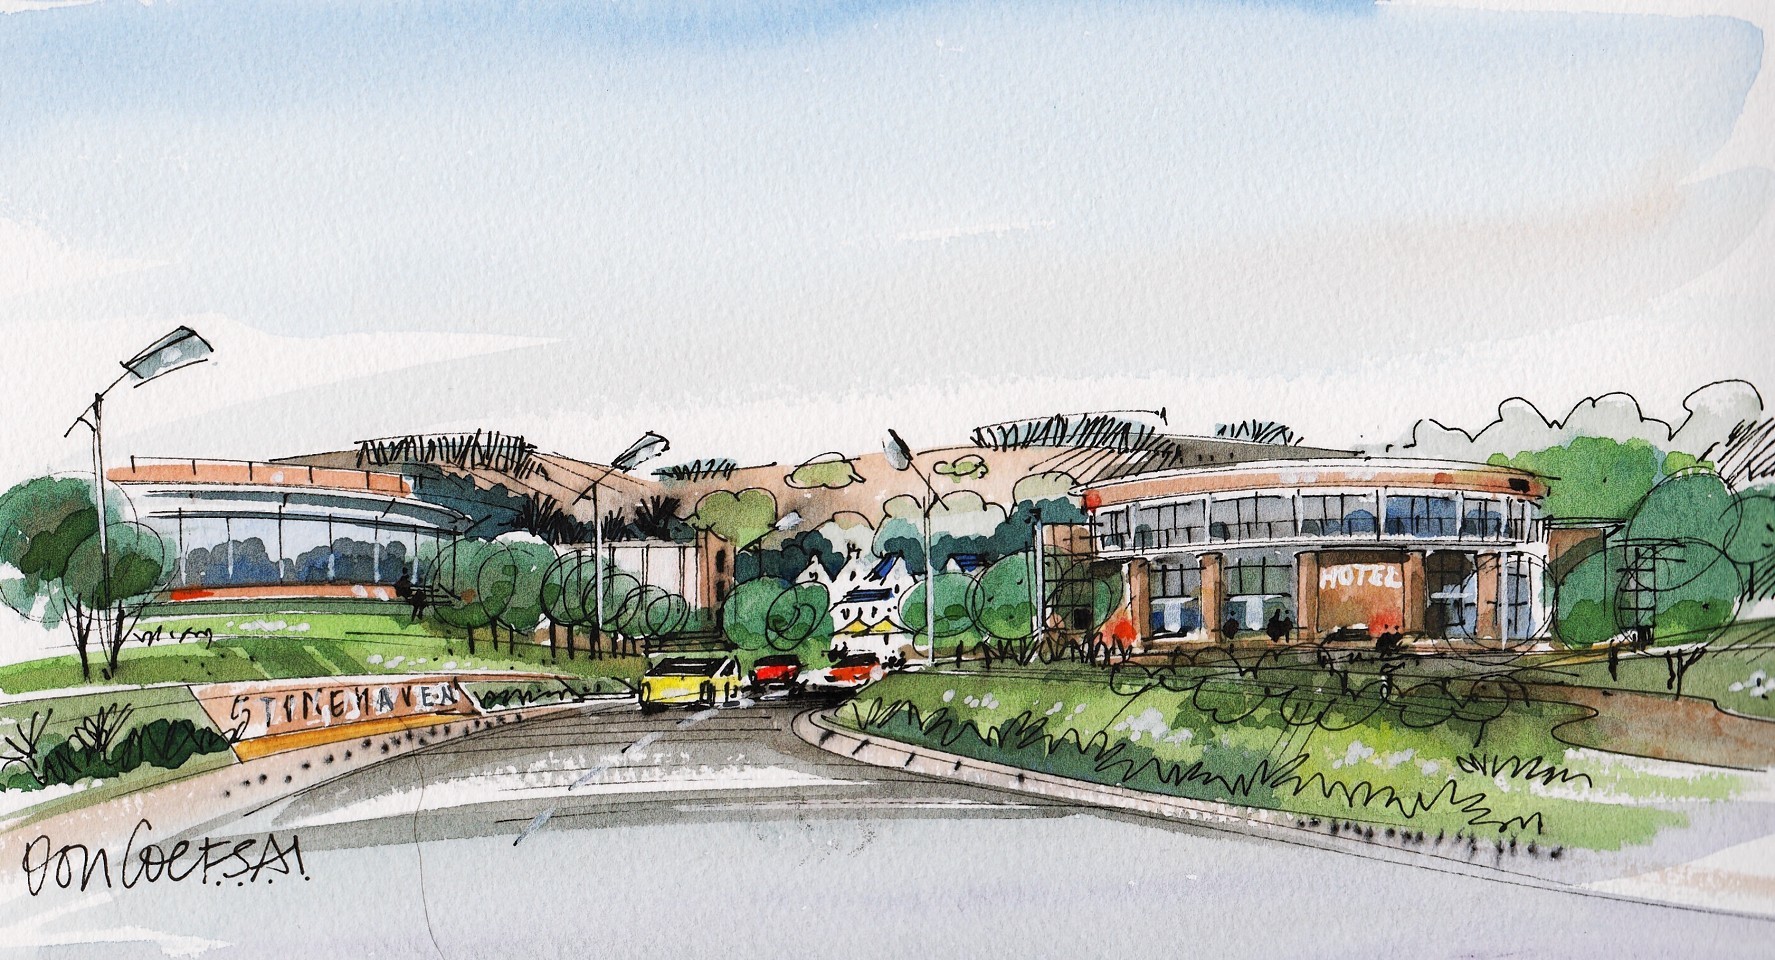 Artist impressions of Mill of Forest, Stonehaven